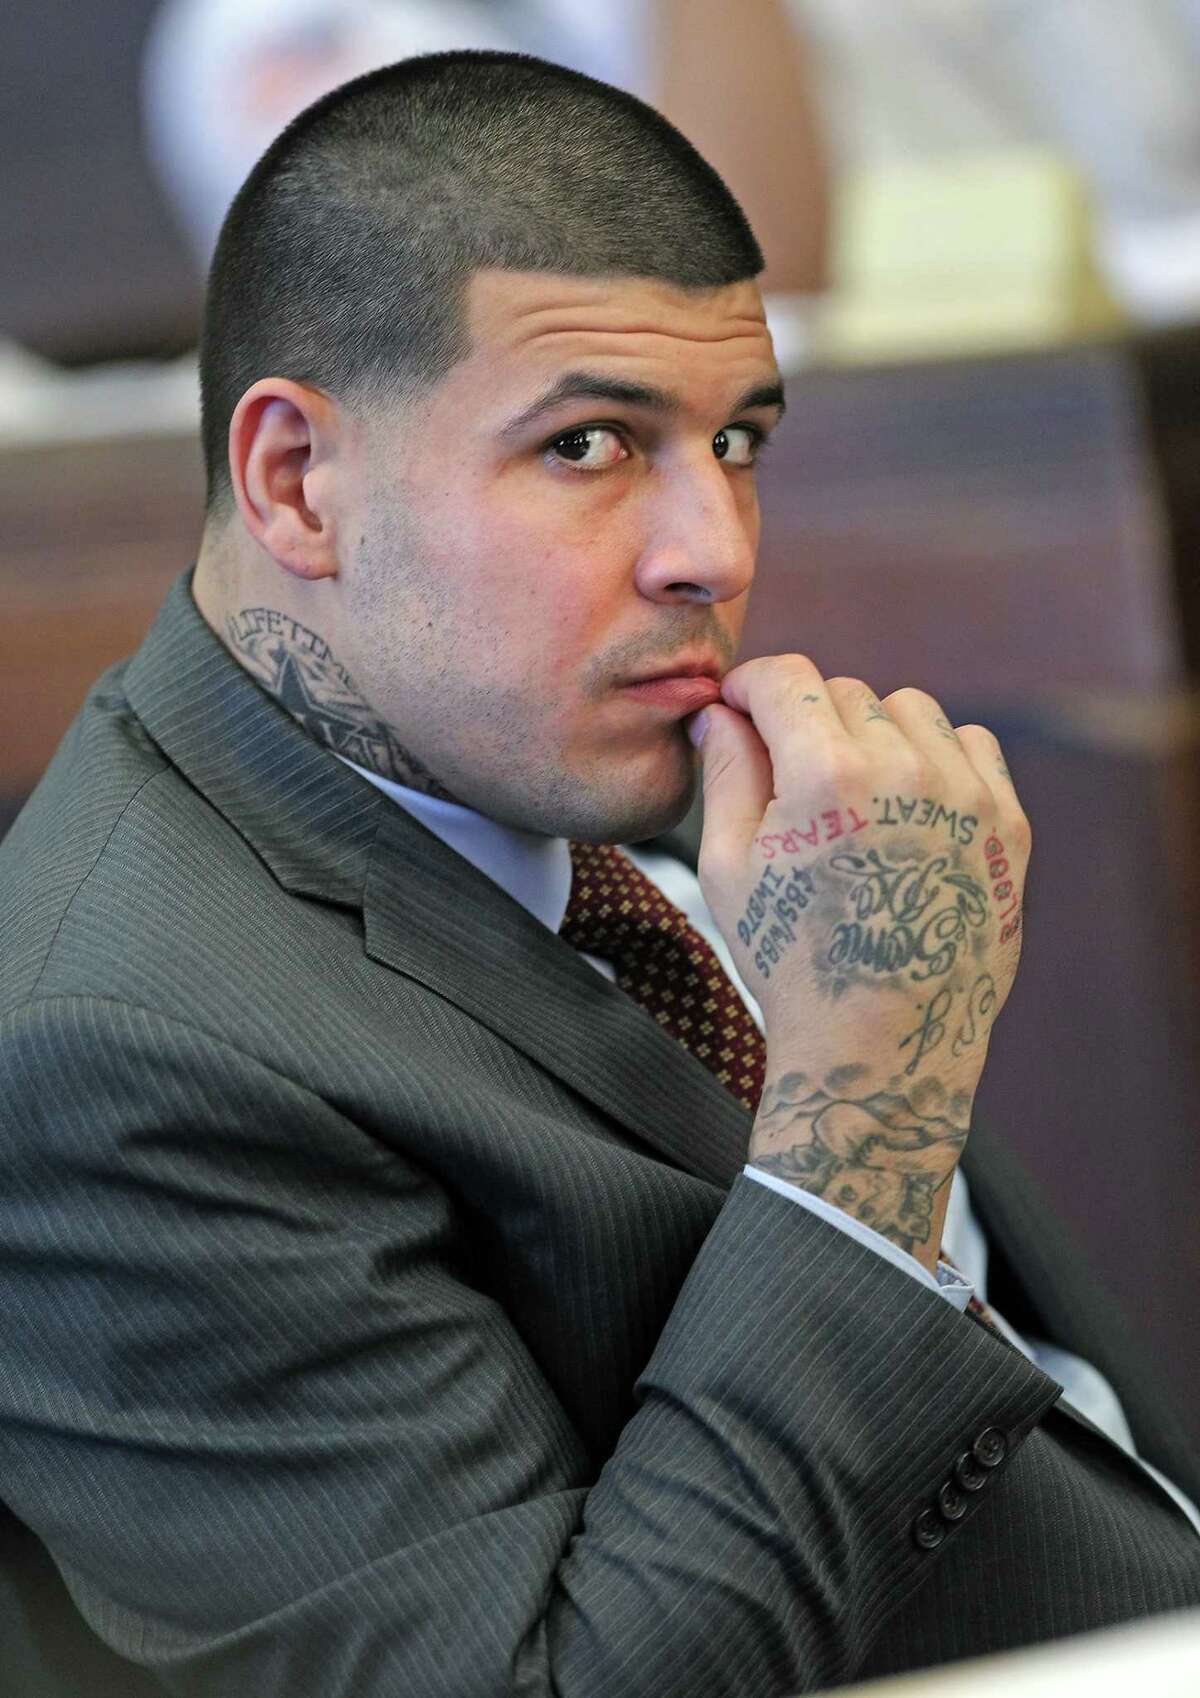 Former New England Patriots NFL football player Aaron Hernandez sits in the court room during his hearing at Suffolk Superior Court in Boston, Tuesday, Oct. 6, 2015. Lawyers for Hernandez have asked a judge to throw out a search warrant that led police to seize a vehicle that prosecutors say Hernandez was driving when he fatally shot two Boston men in 2012.